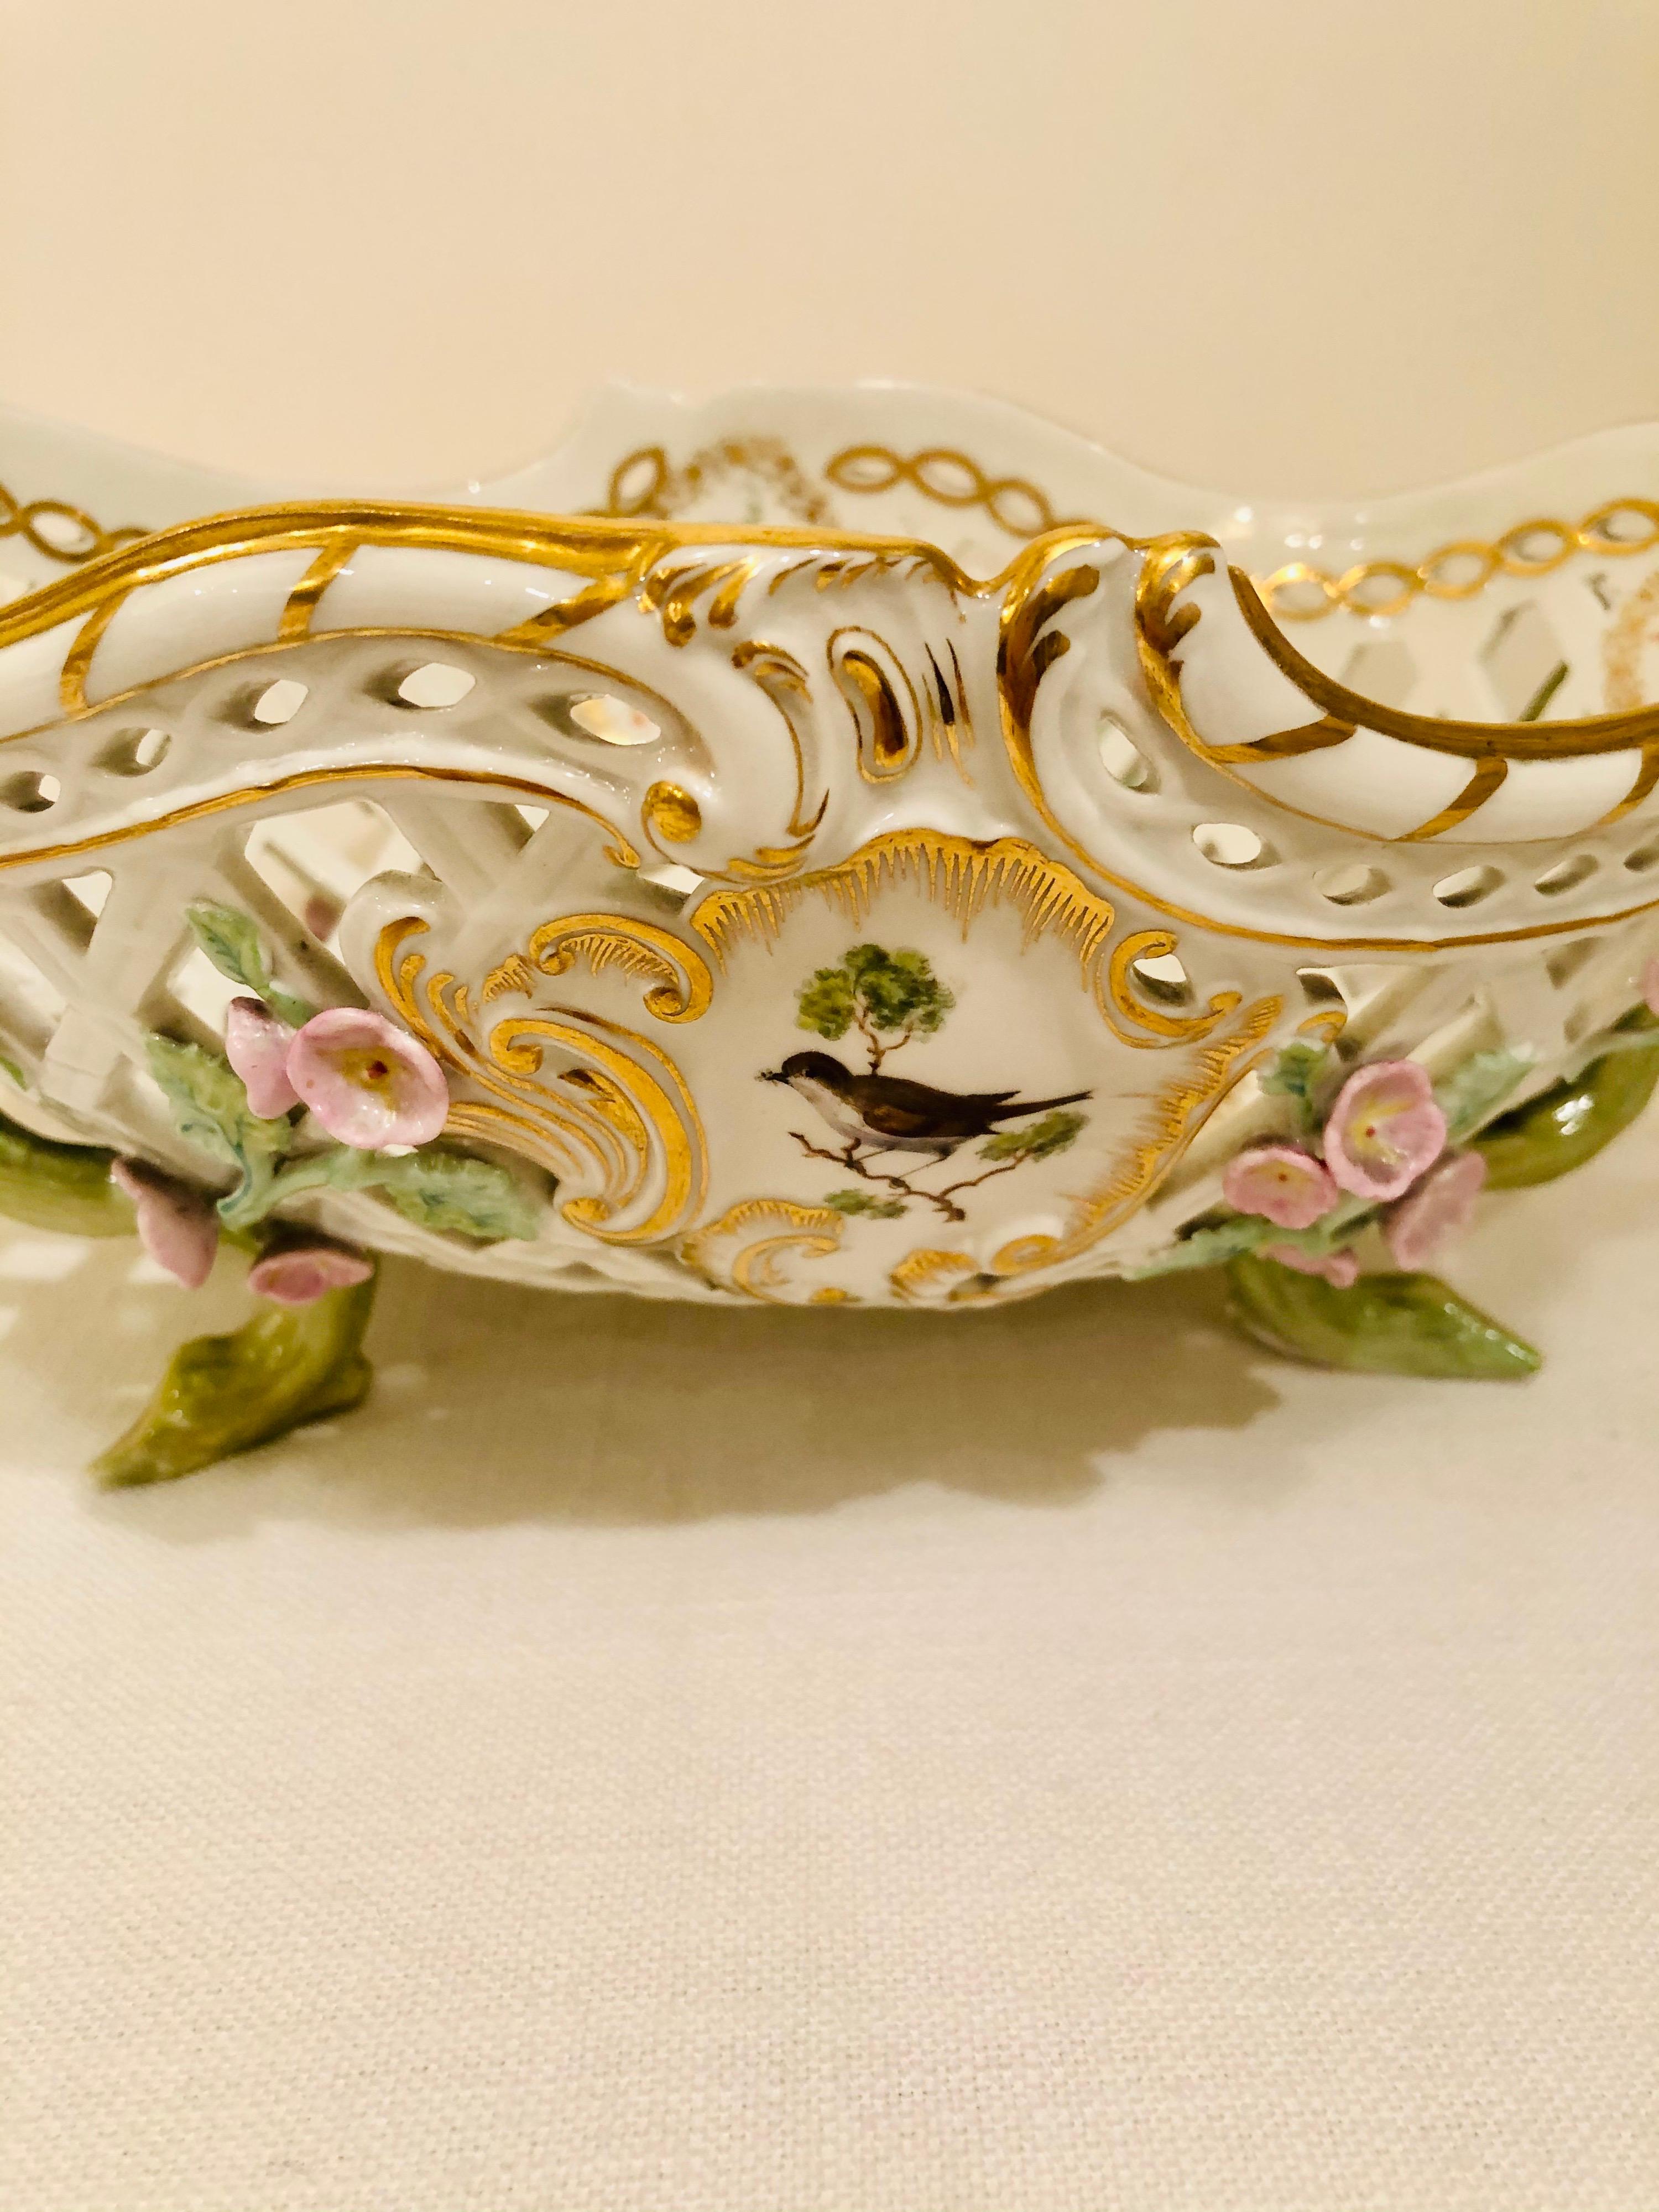 KPM Openwork Bowl with Raised Pink Flowers and Painted Birds on Both Sides For Sale 6